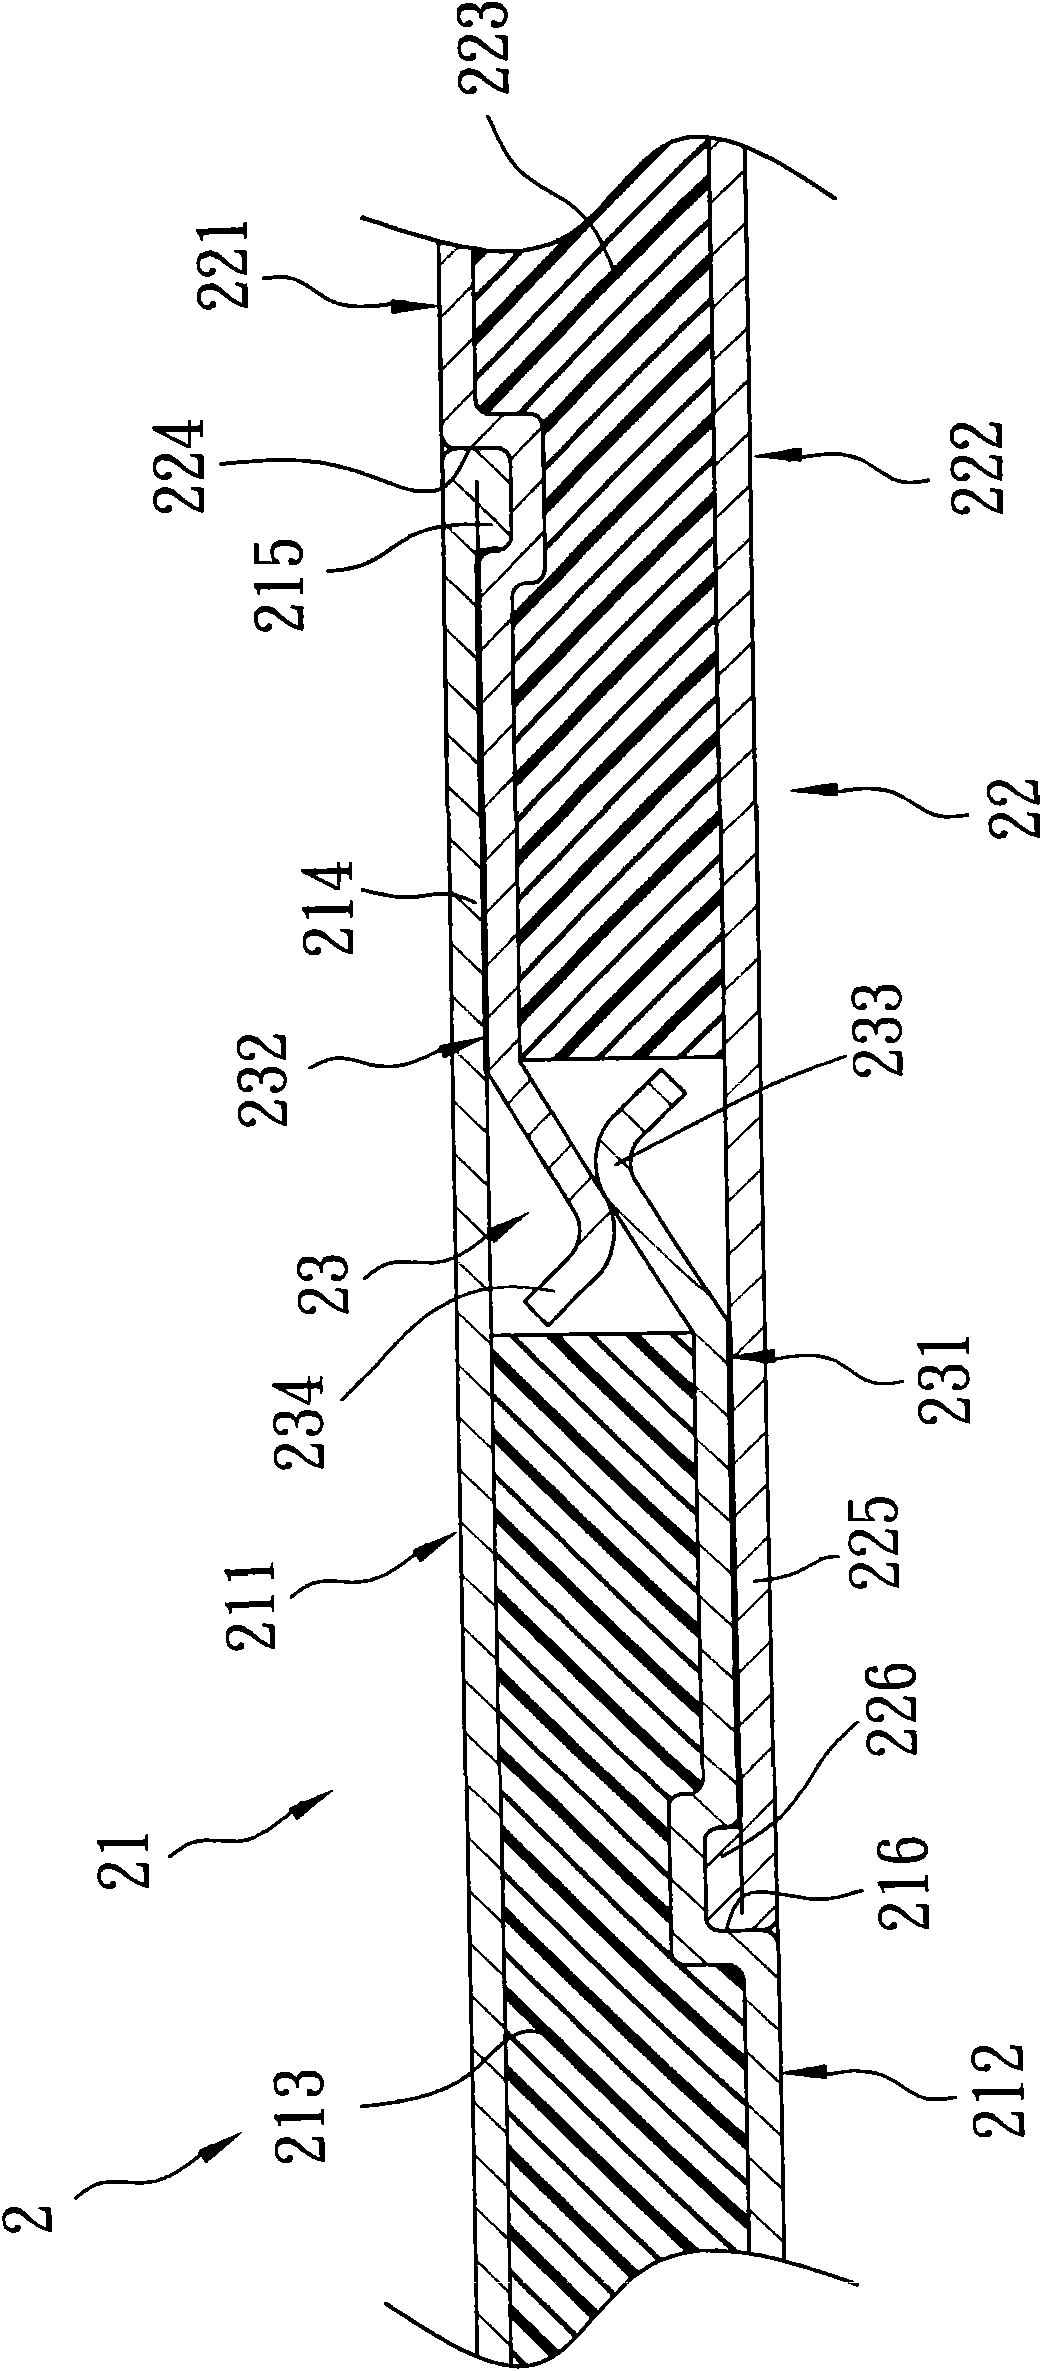 Composite plate assembly